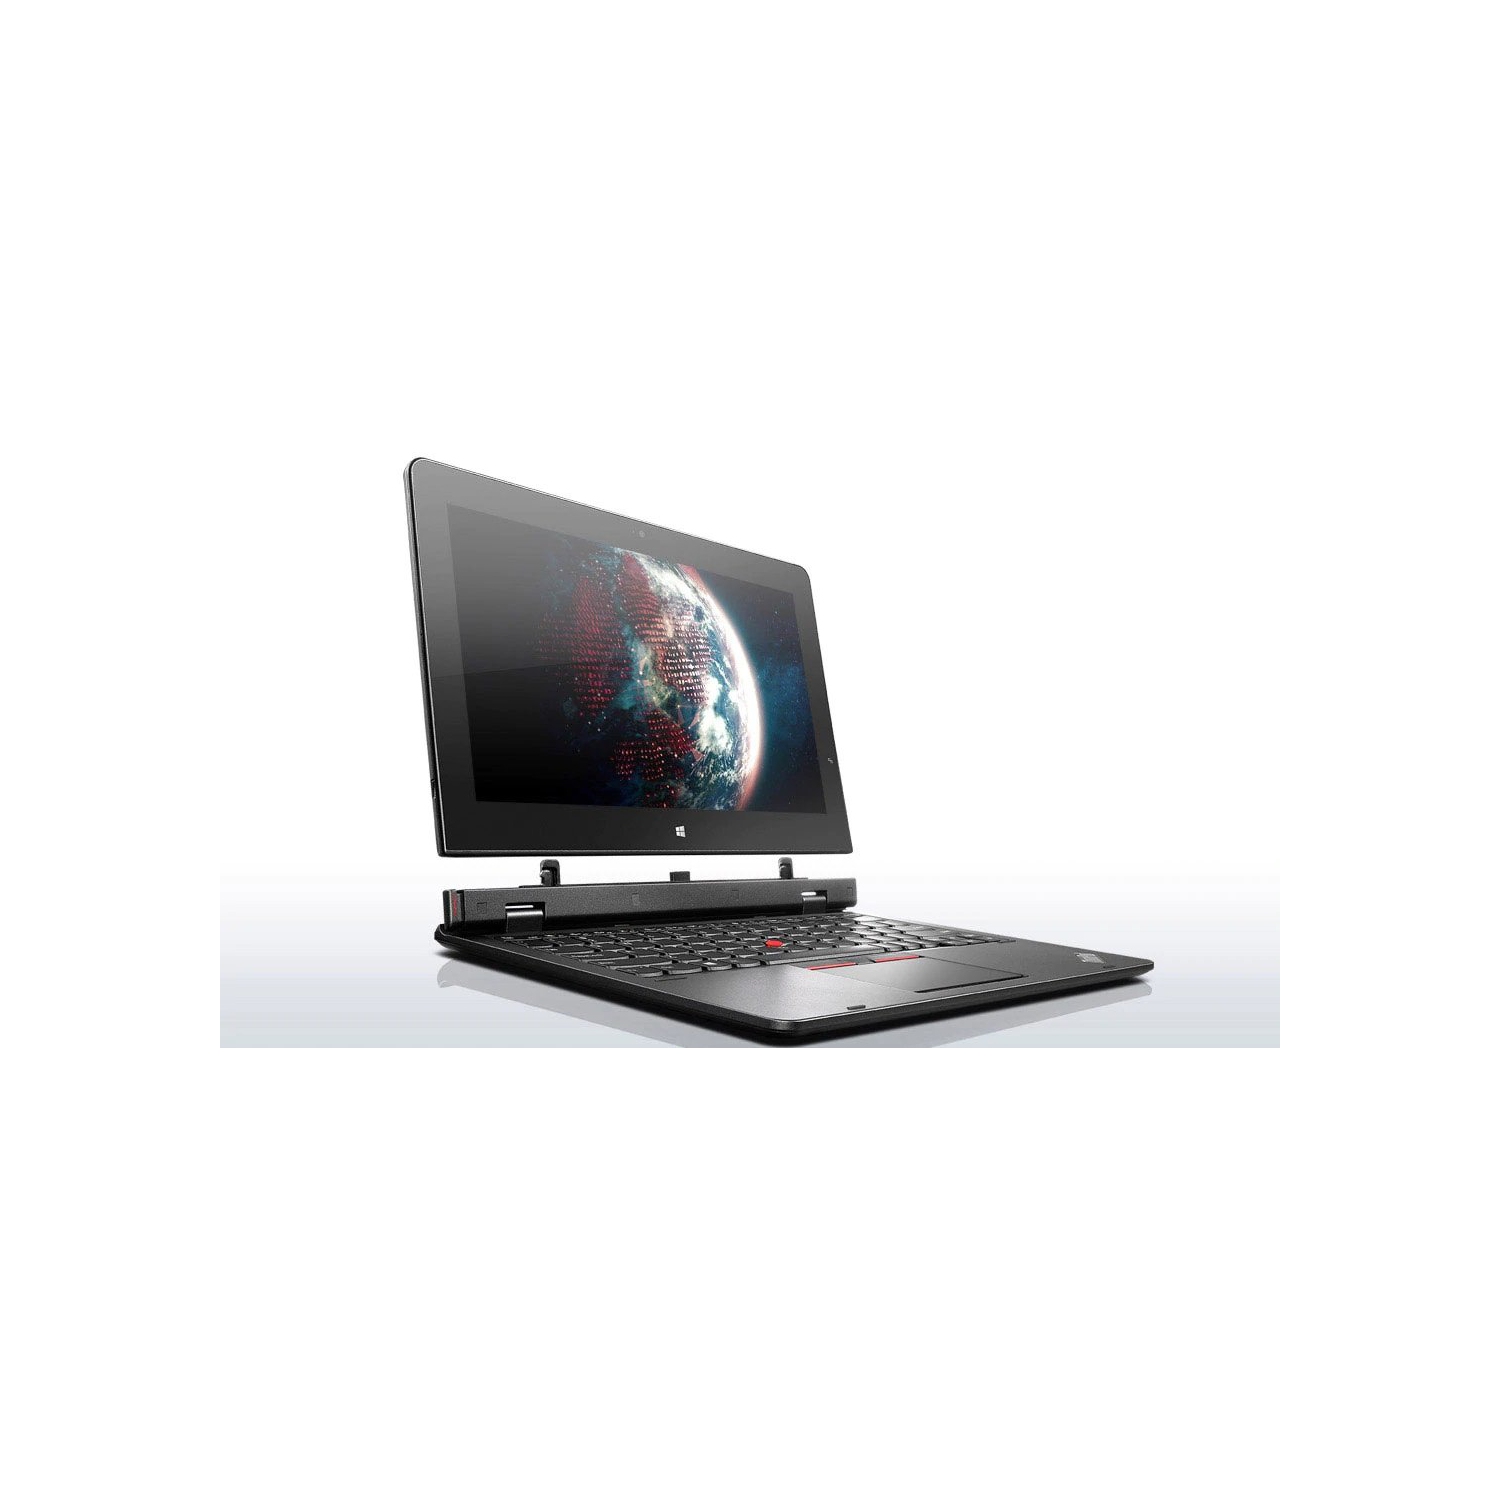 Refurbished (Excellent) - Lenovo ThinkPad Helix (2nd Gen) 11.6" 2 in 1 Laptop-Tablet, Intel Core M, 8GB RAM, 256GB SSD, Windows 10 Home.